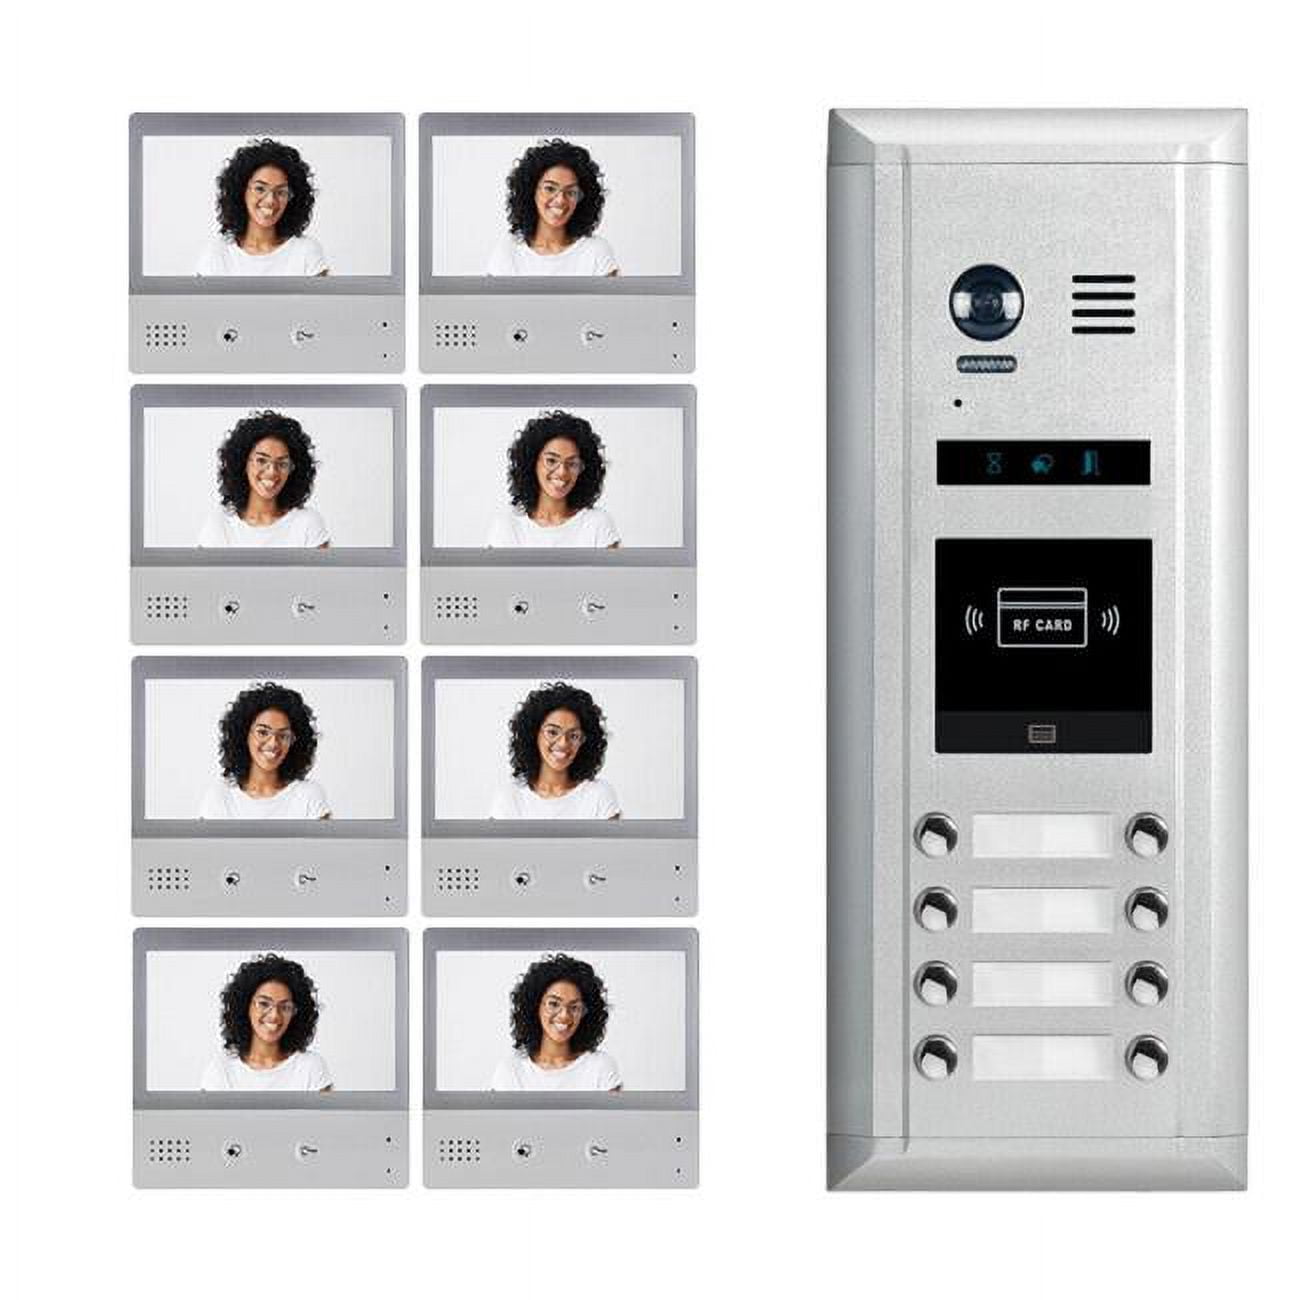 Picture of 2Easy Video Intercom System 5000-N 7 in. 170 deg Camera Unit 2 Wire Connection LCD Touch Monitors 8 Apartments Wi-Fi Audio & Video Doorbell Intercom Kit